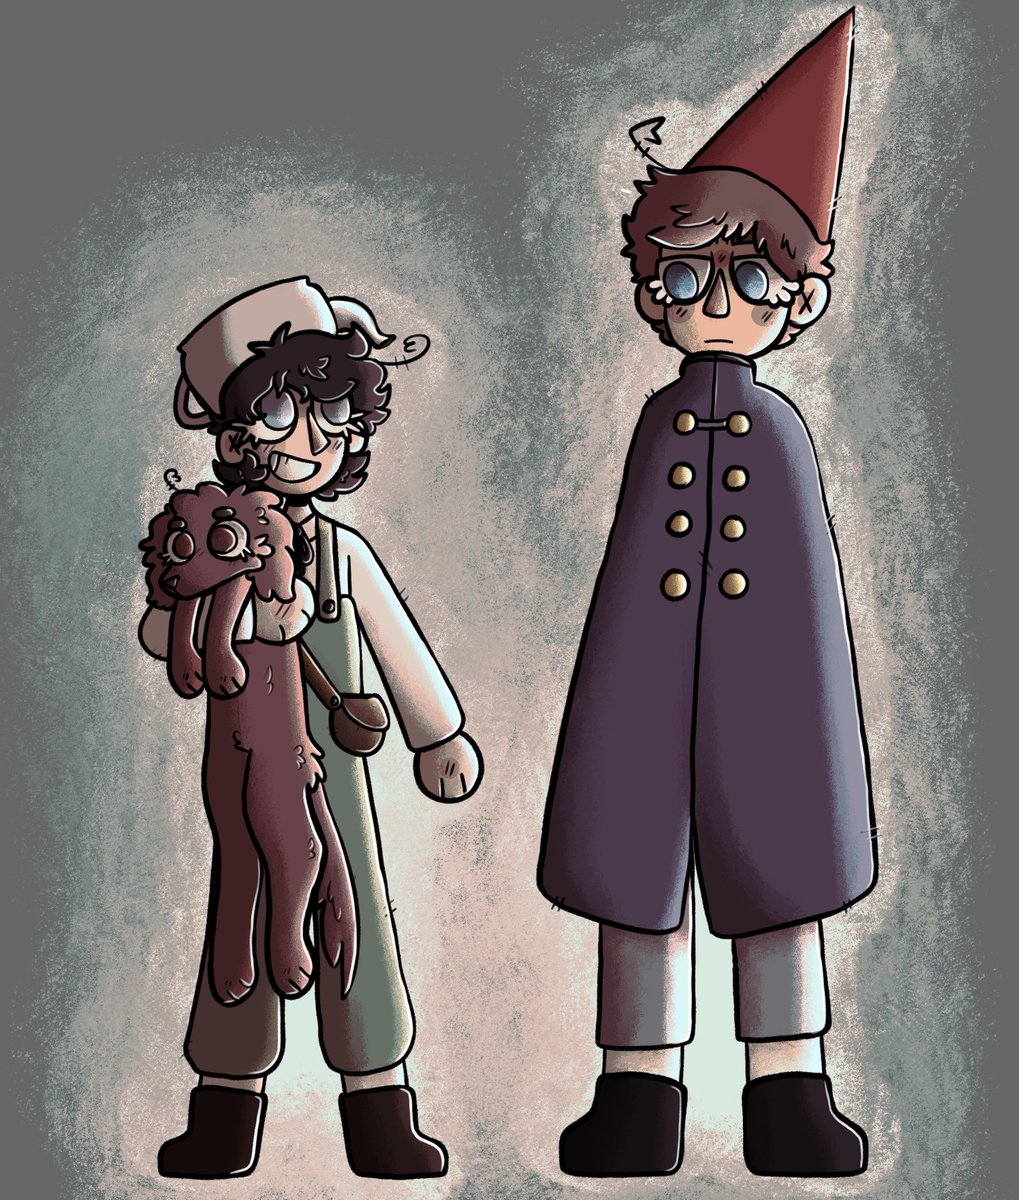 i never posted this but i cooked here
#bbcsh #sherlockfanart #otgw